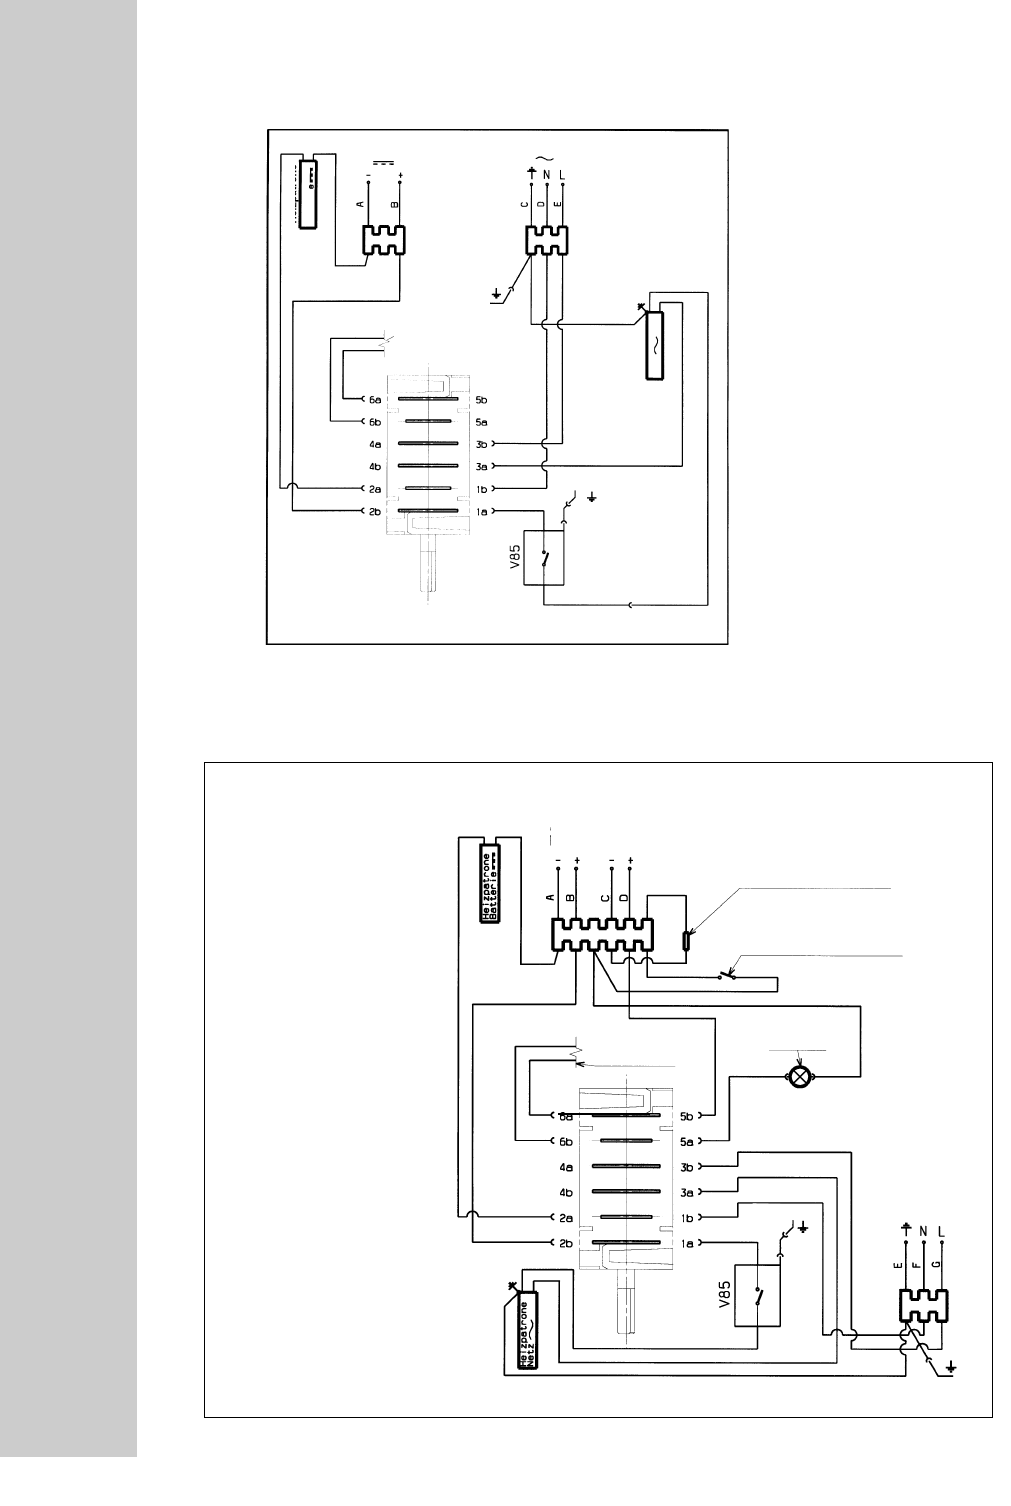 Page 26 of Dometic Refrigerator RM 6291(L) User Guide | ManualsOnline.com  Electrolux 3 Way Caravan Fridge Wiring Diagram    Kitchen Appliance Manuals - Manuals Online